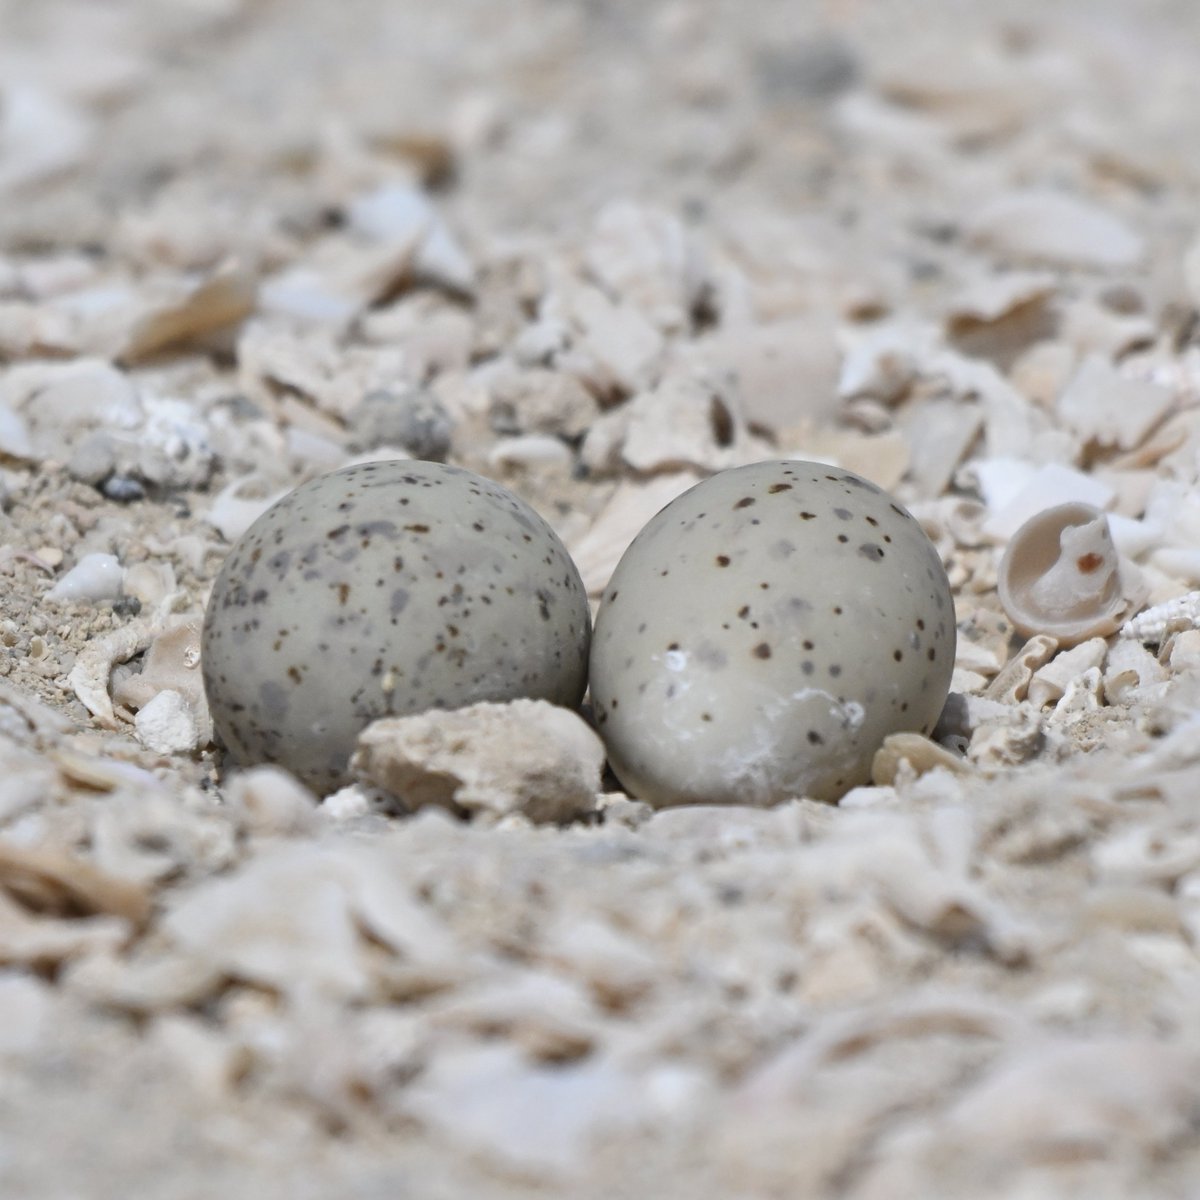 #Bahrain completed my nest survey of four northern coastal sites, all close to human habitation for breeding Saunders's Terns. In total, I found 23 nests, the majority of which contained two eggs, now to monitor the outcome and their chances of survival.